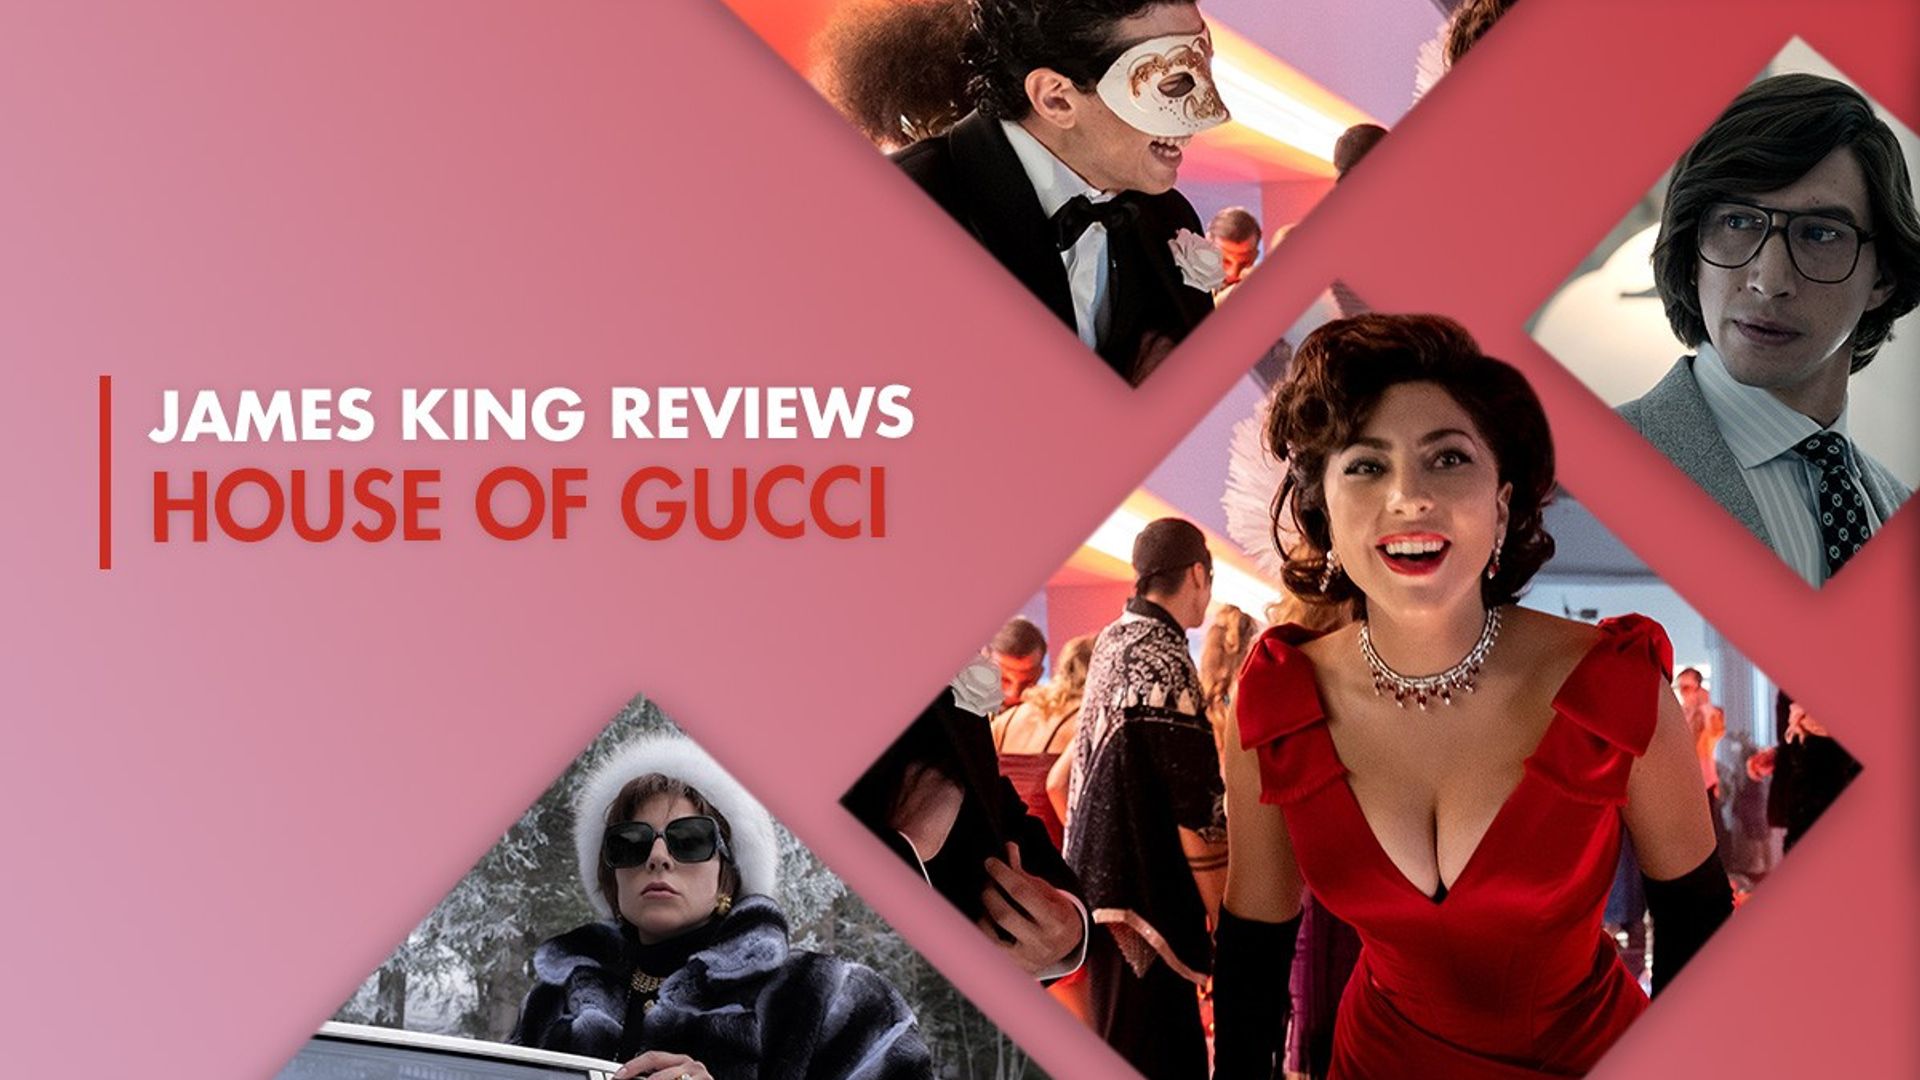 House of Gucci review: Gaga sparkles in real-life bad romance